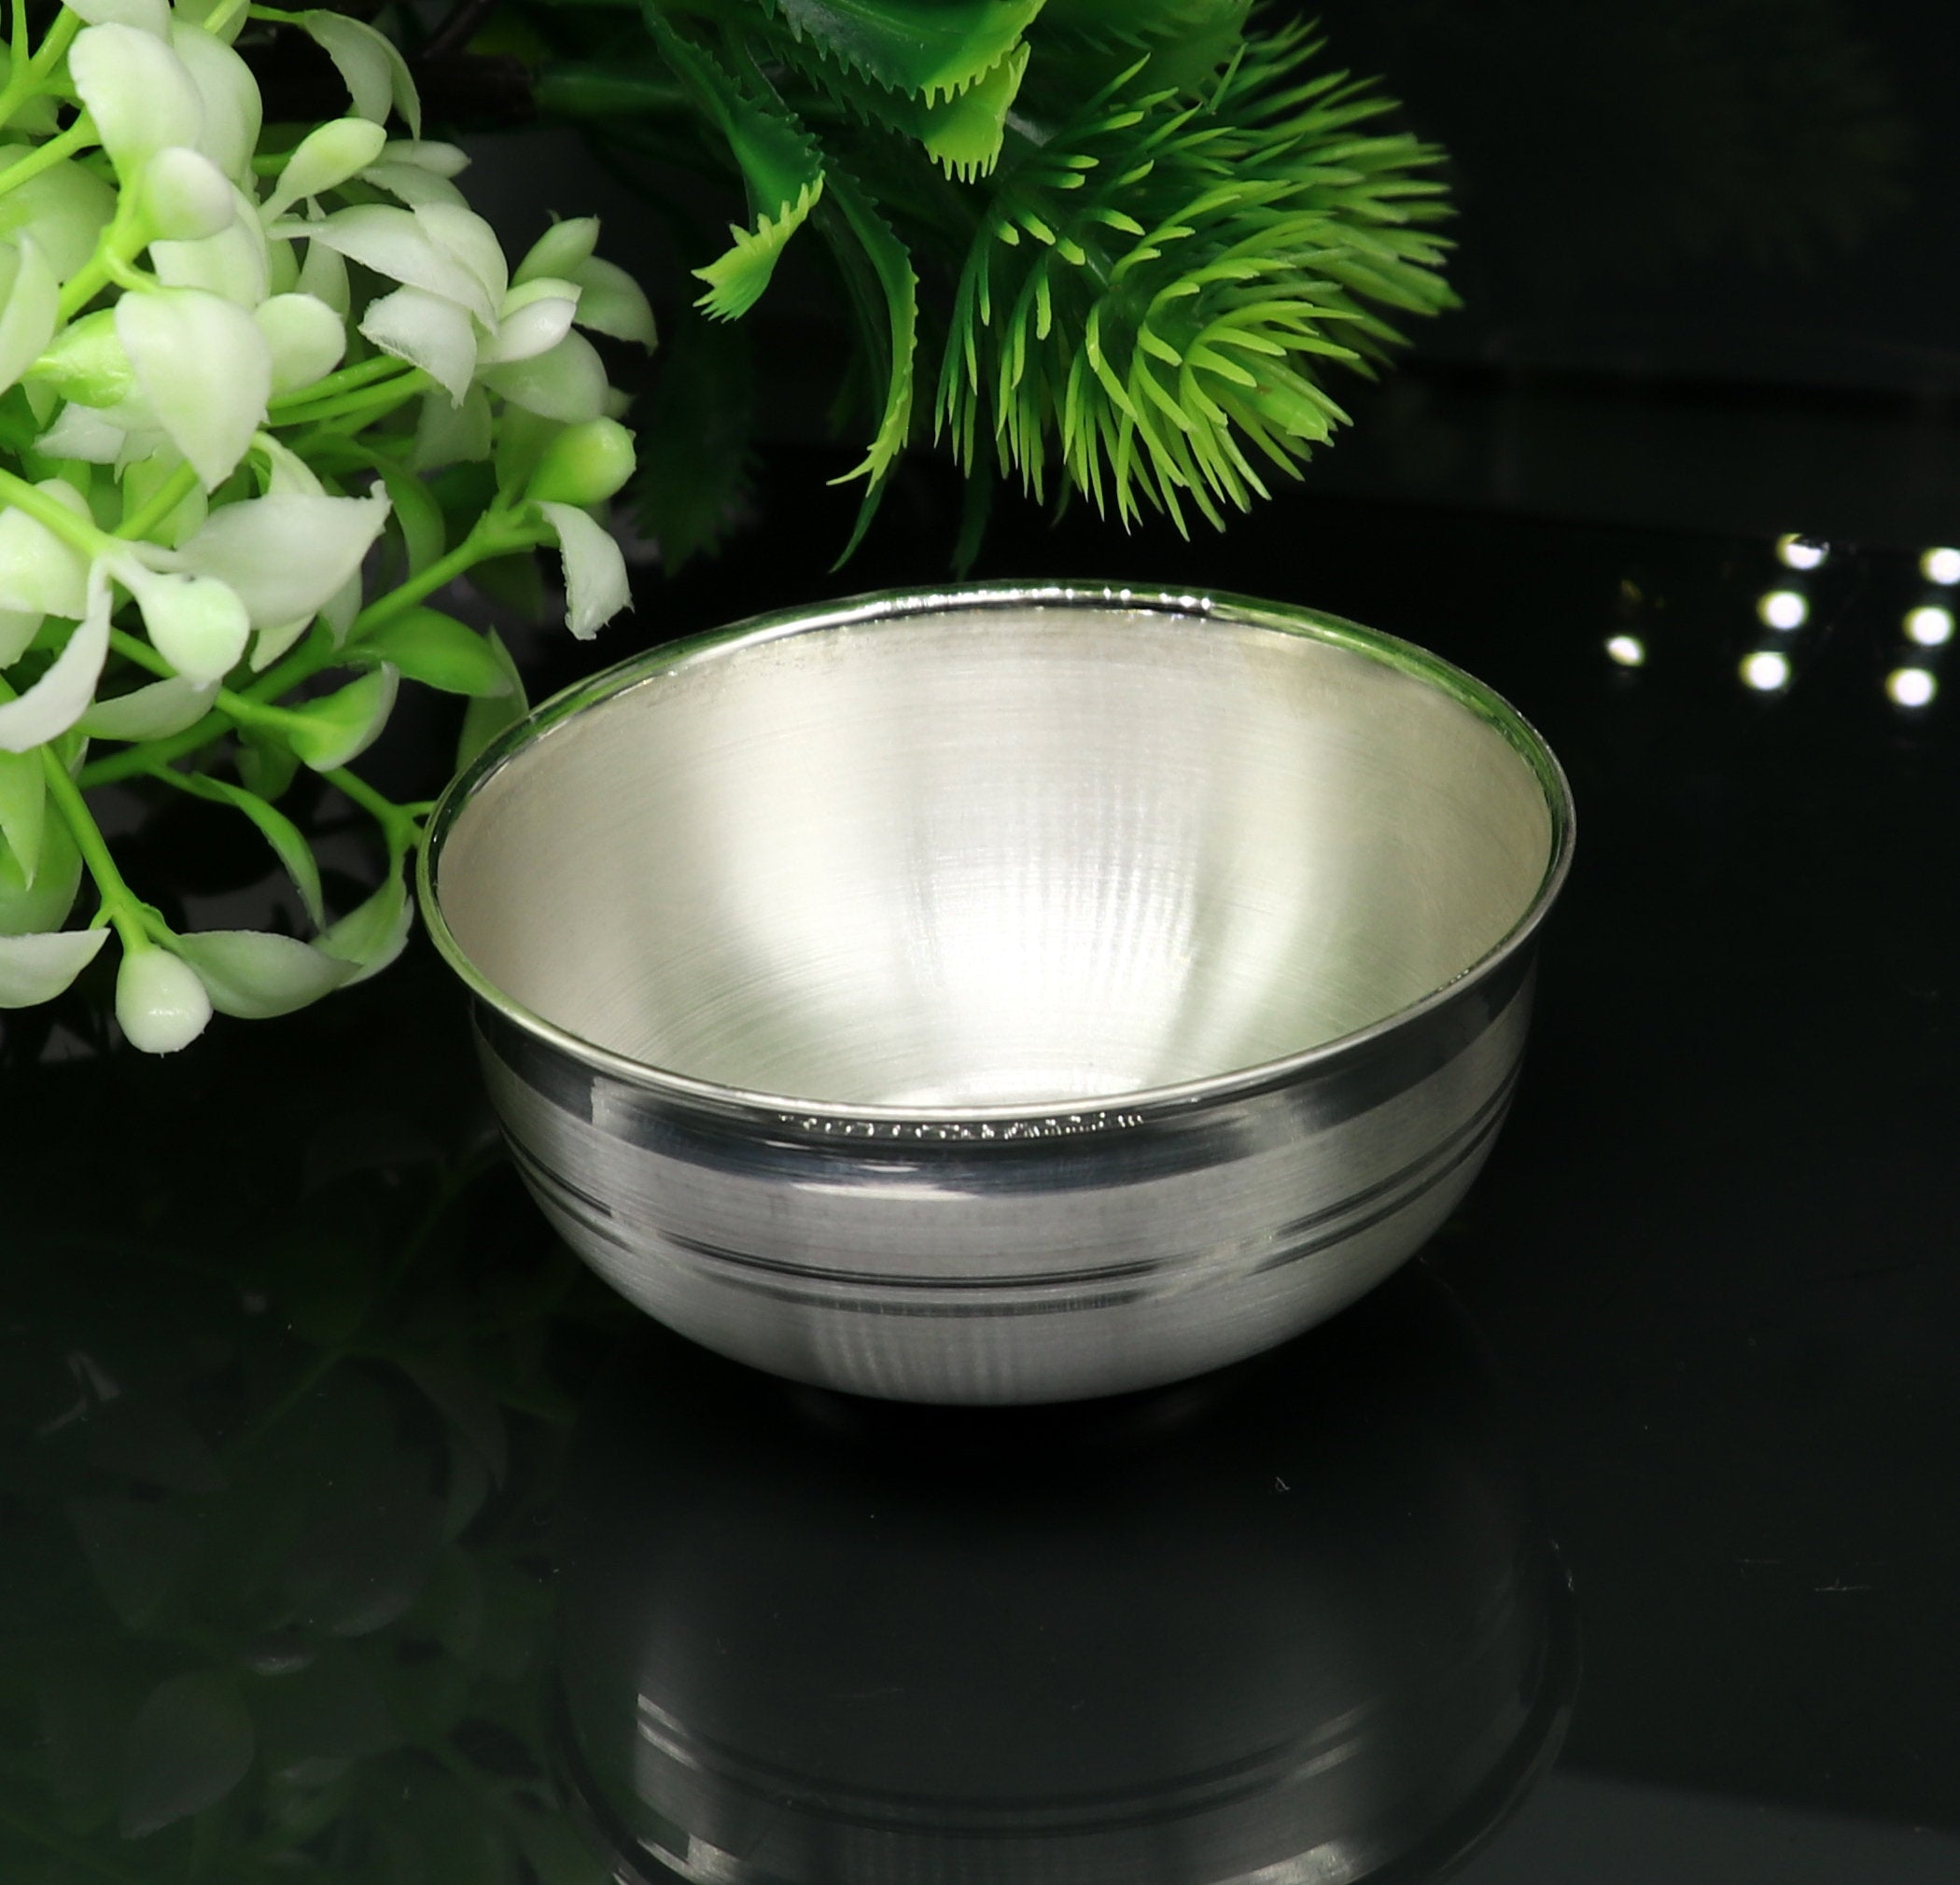 Stainless Steel Cooking Pot, Dekchi/Handi for Cooking. – Nutristar